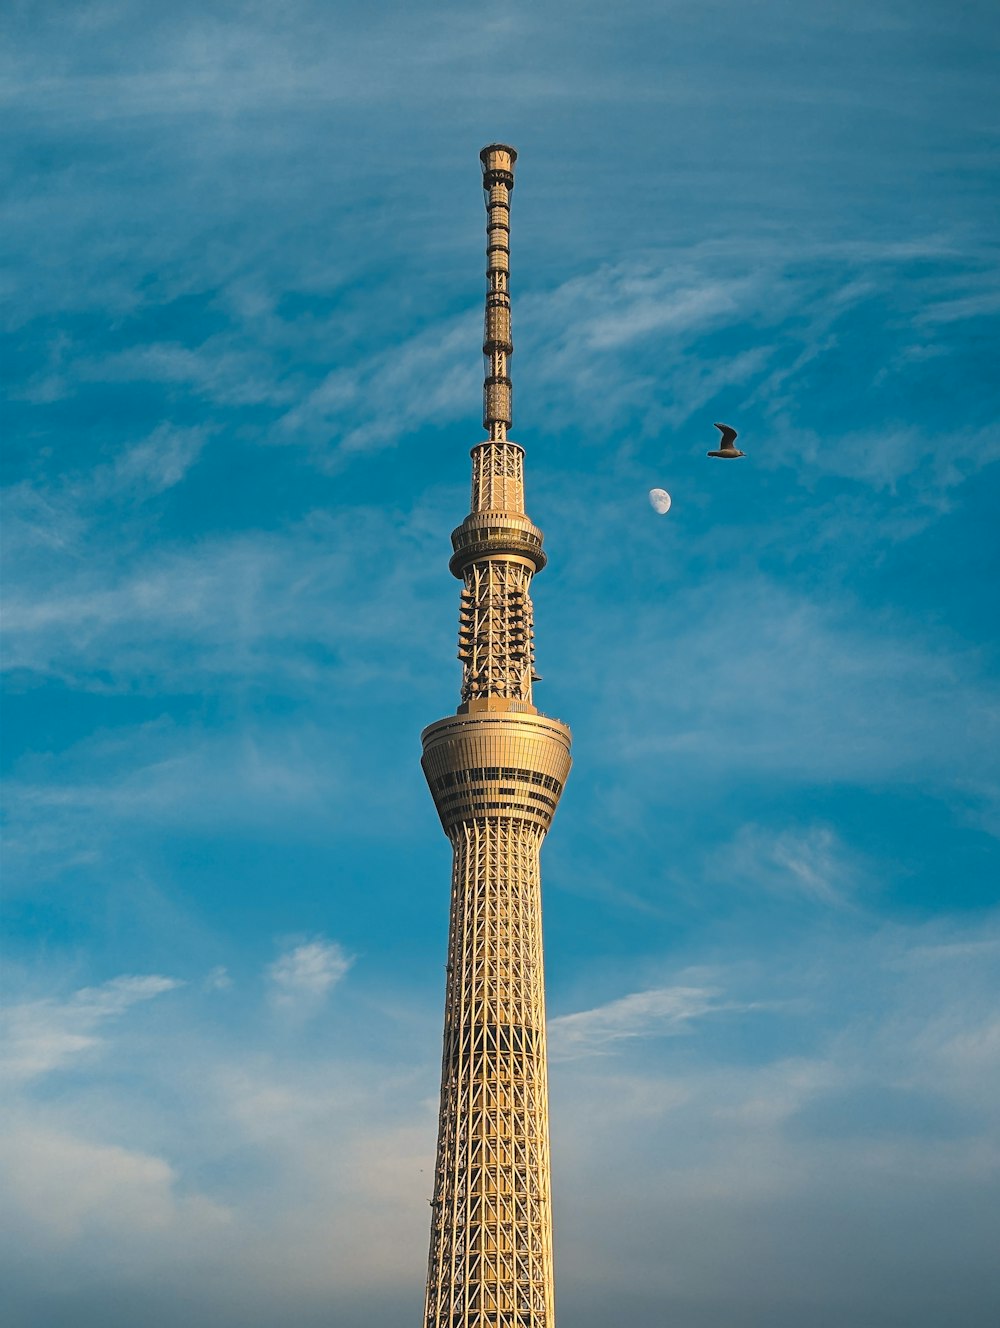 a tall tower with a bird flying in the sky